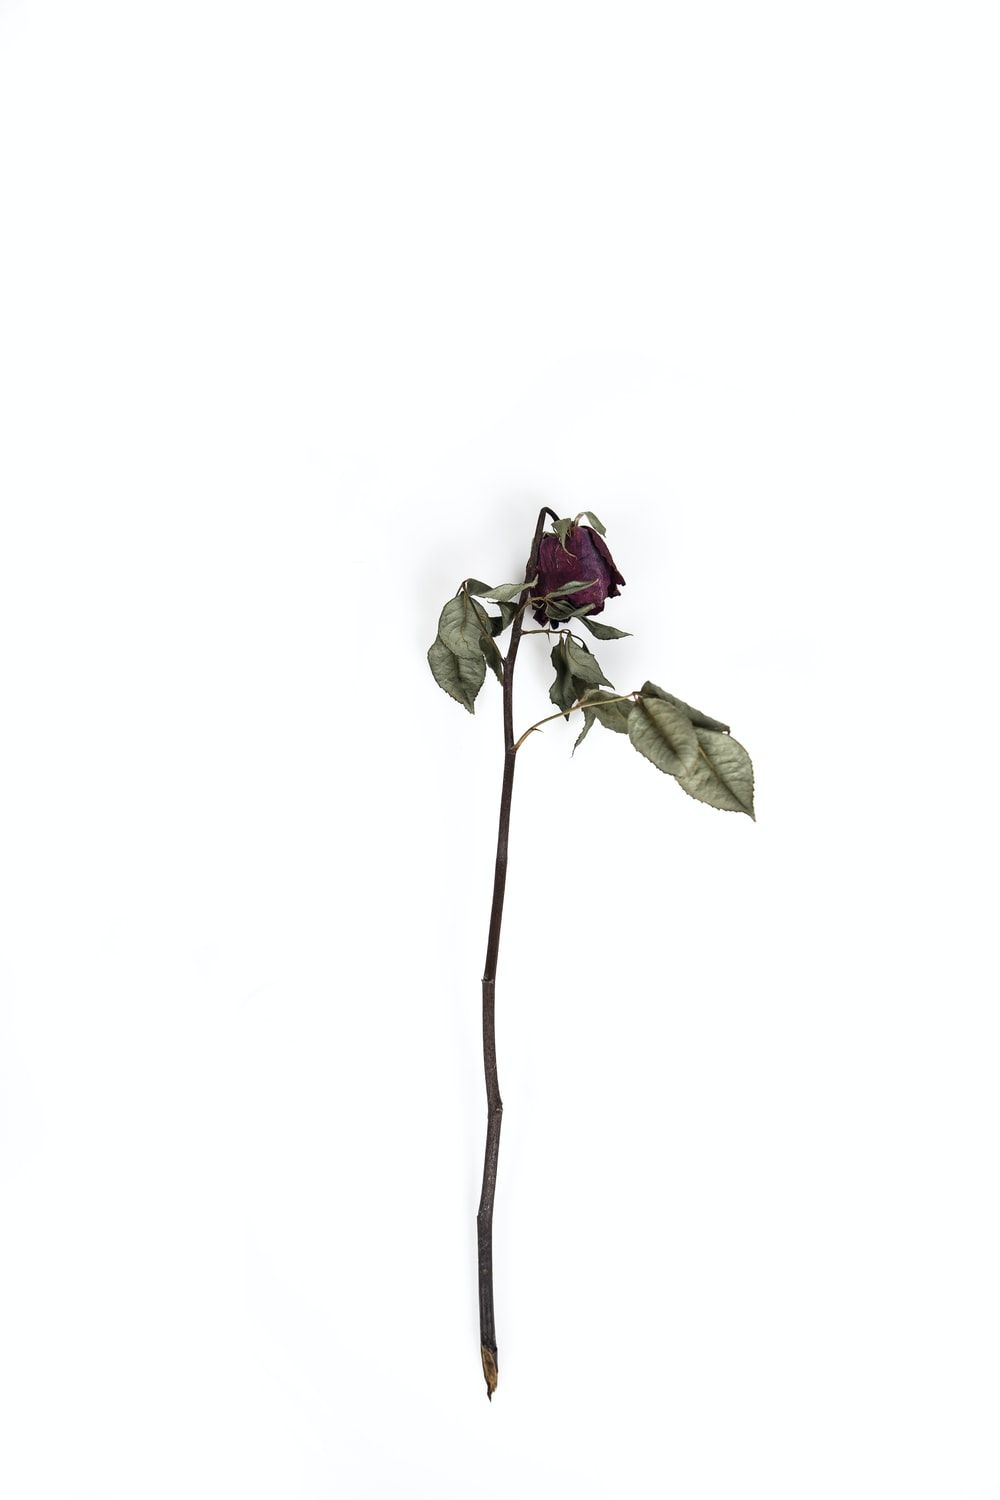 Dead Flowers Picture. Download Free Image